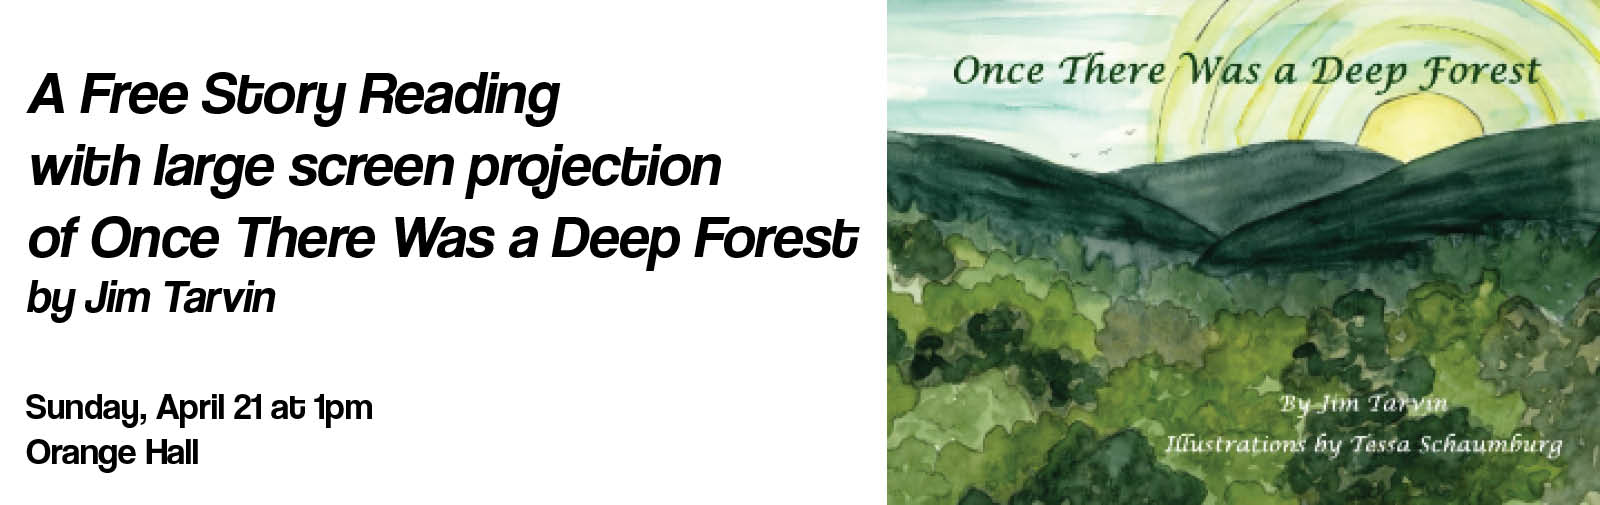 A free Story Reading of Once There Was a Deep Forest by Jim Tarvin